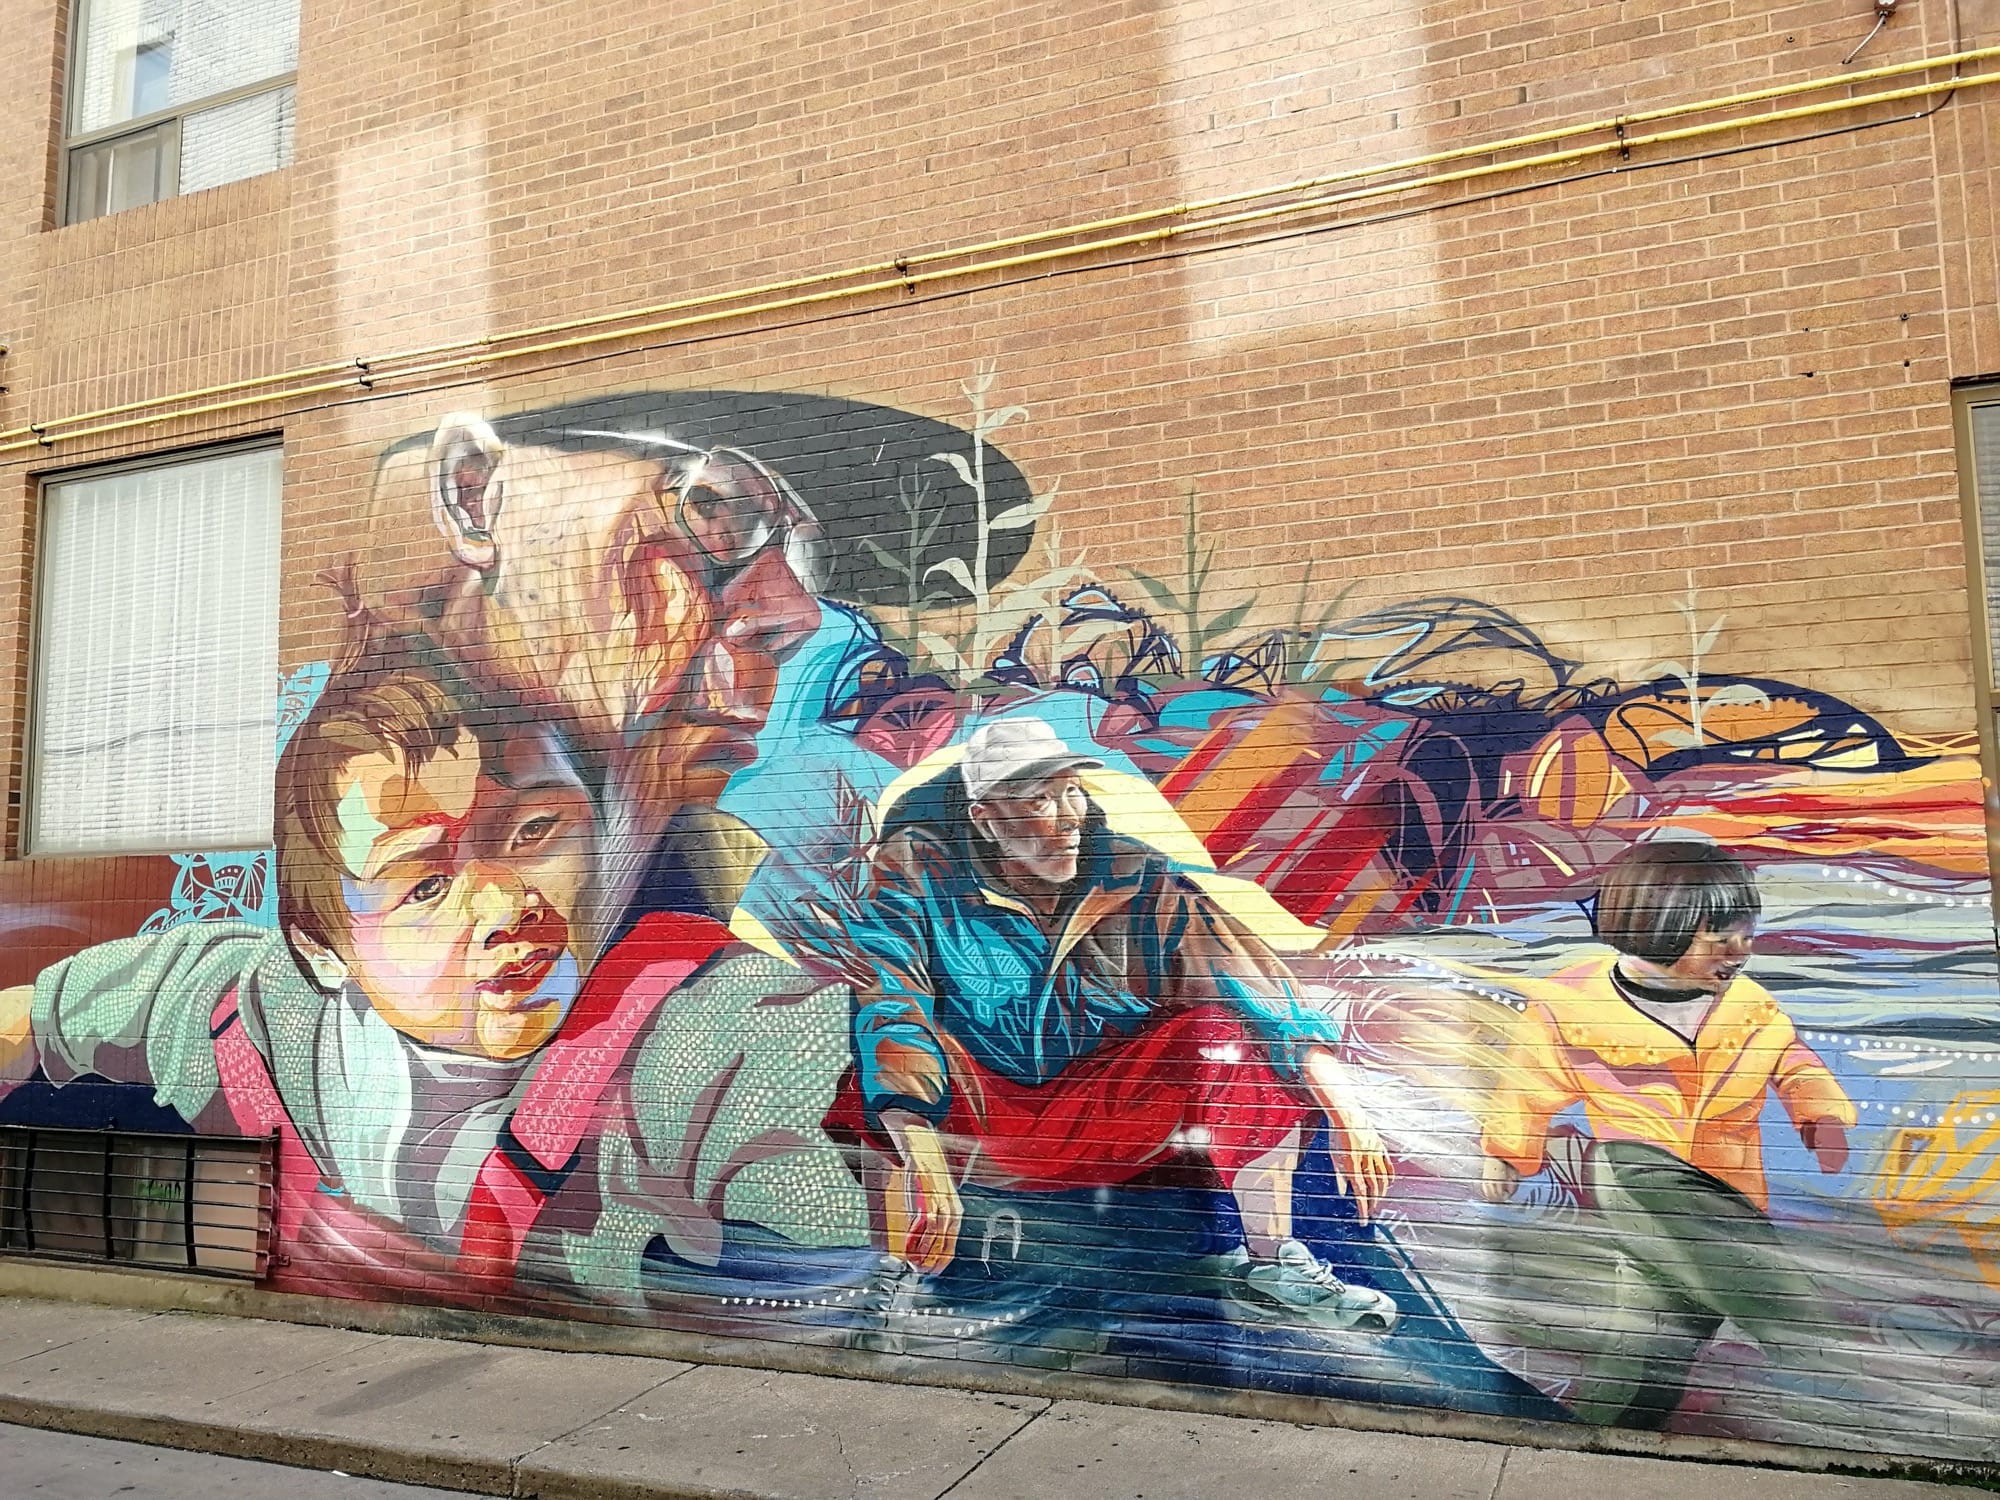 Graffiti 2355  captured by Rabot in Toronto Canada